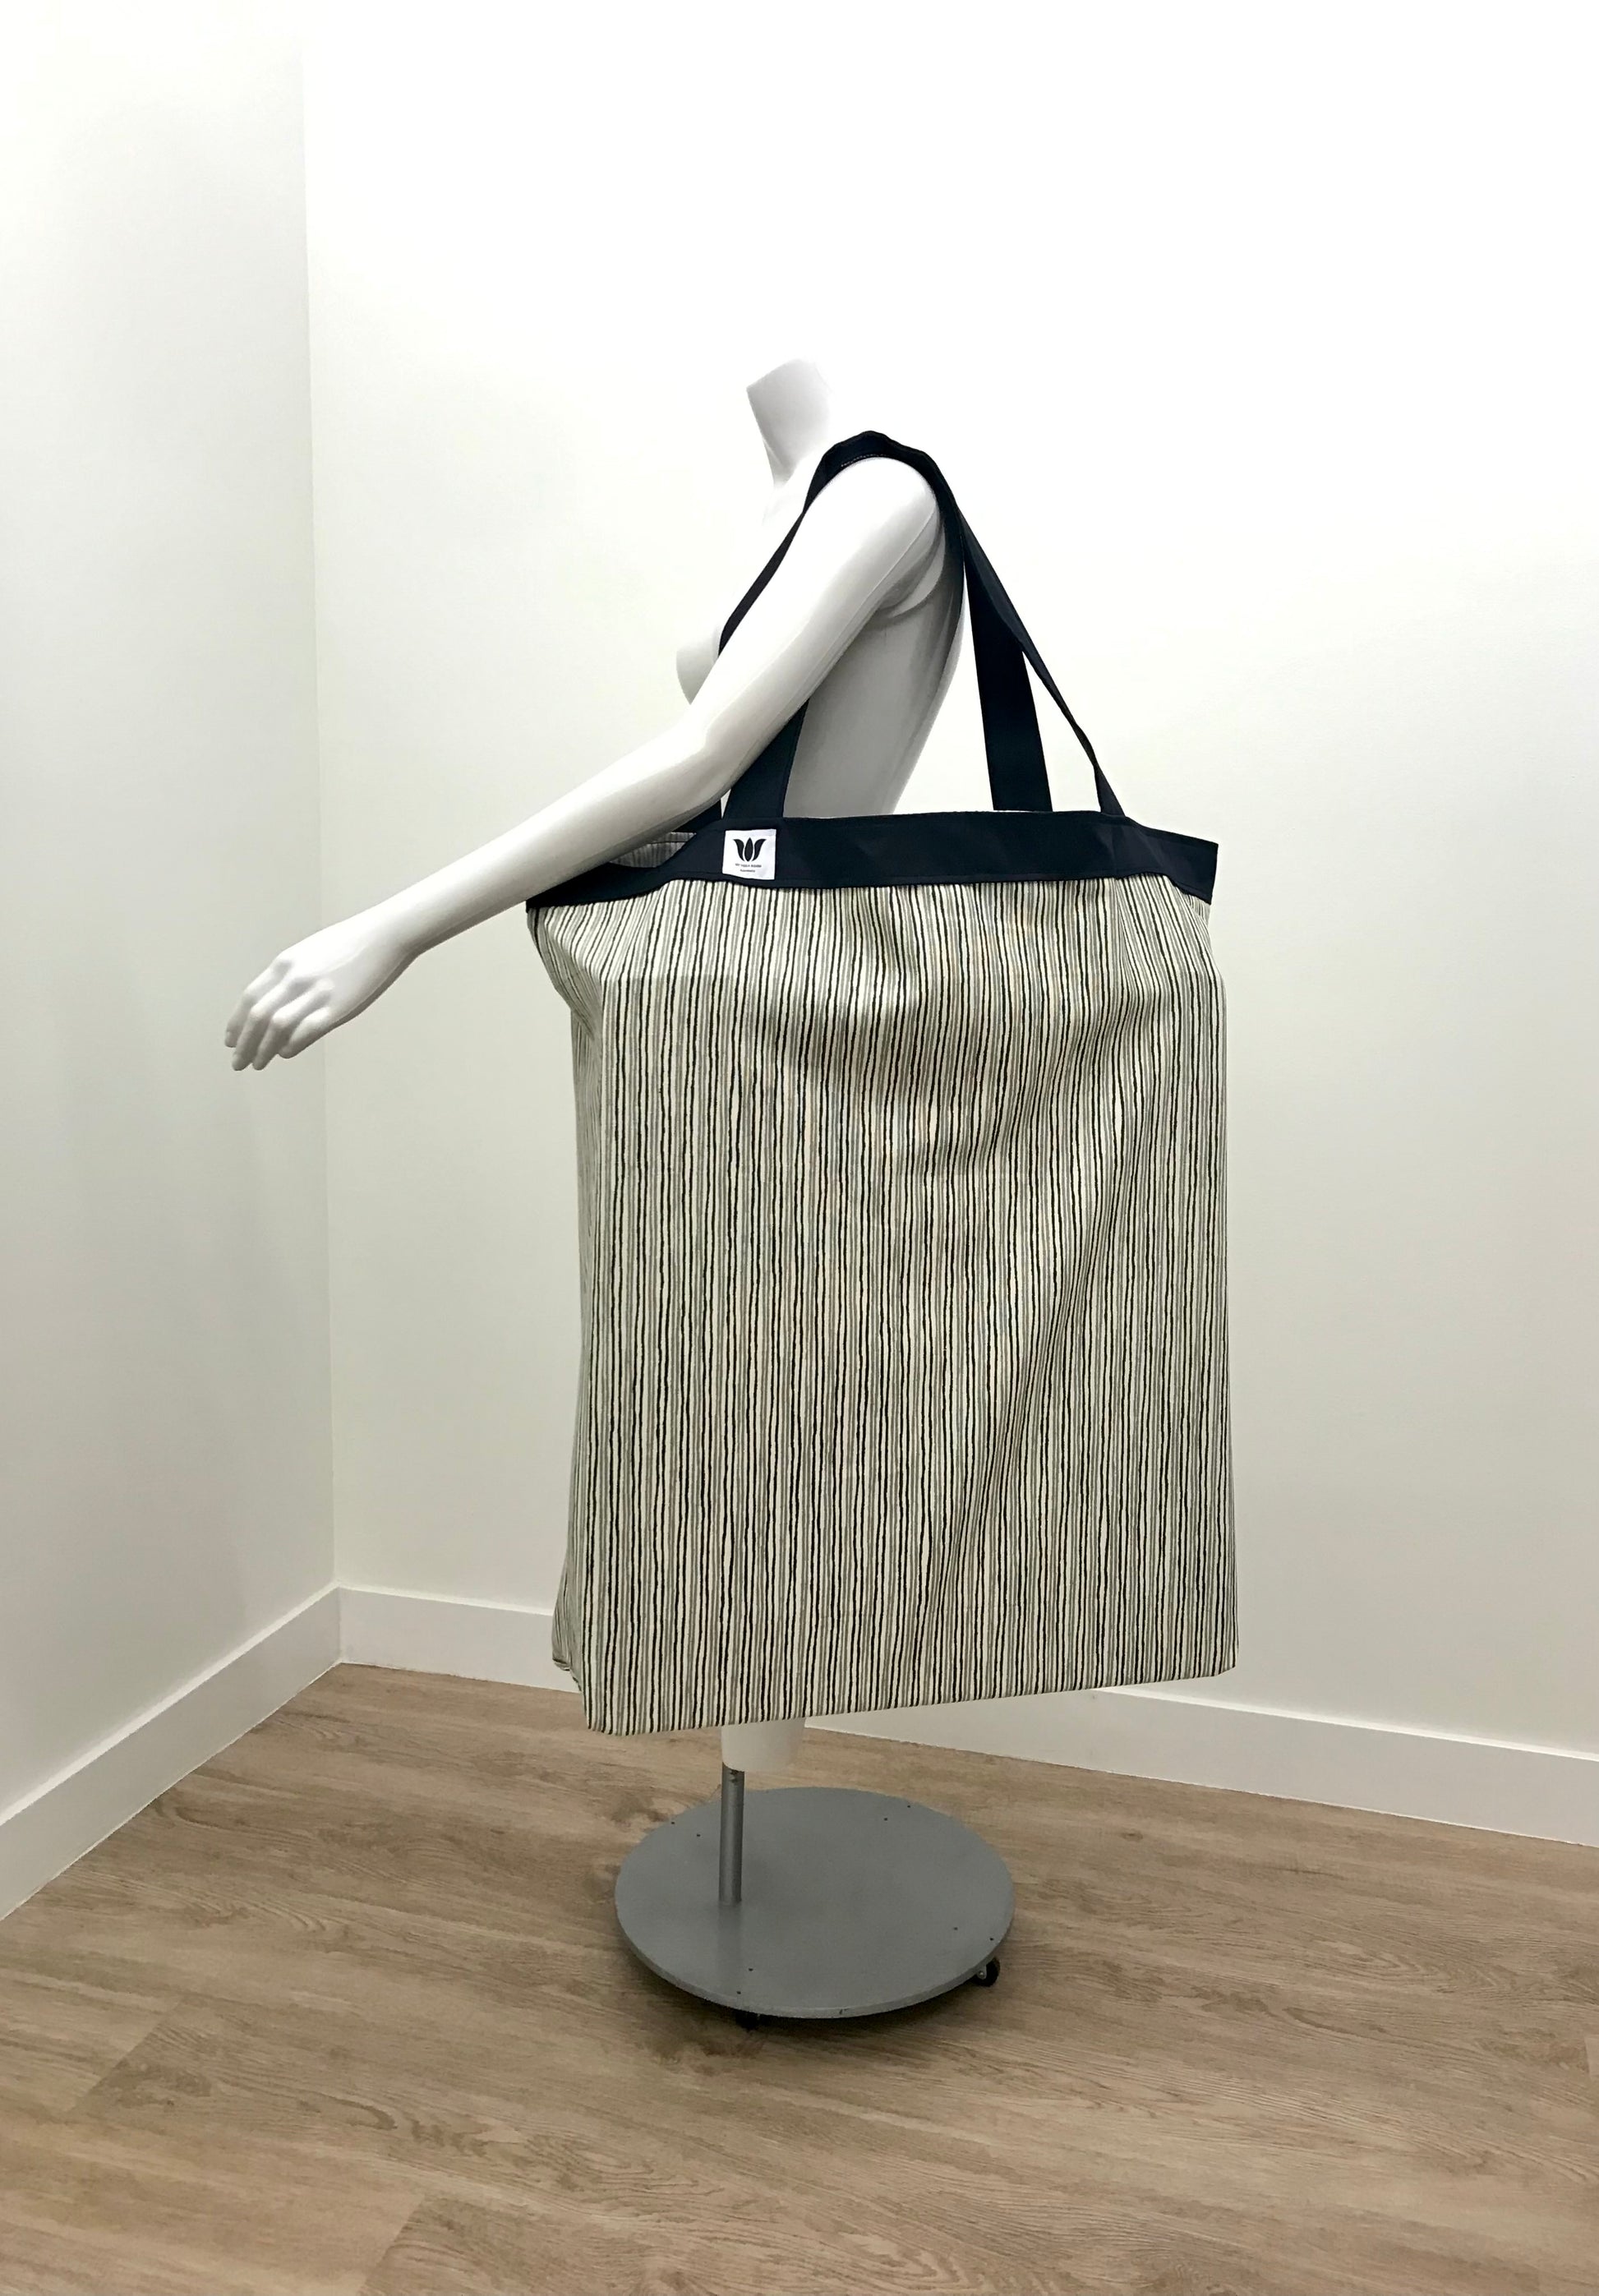 Yoga Tote in sturdy cotton canvas to carry and or store yoga props for yoga practice. Made in Canada by My Yoga Room Elements